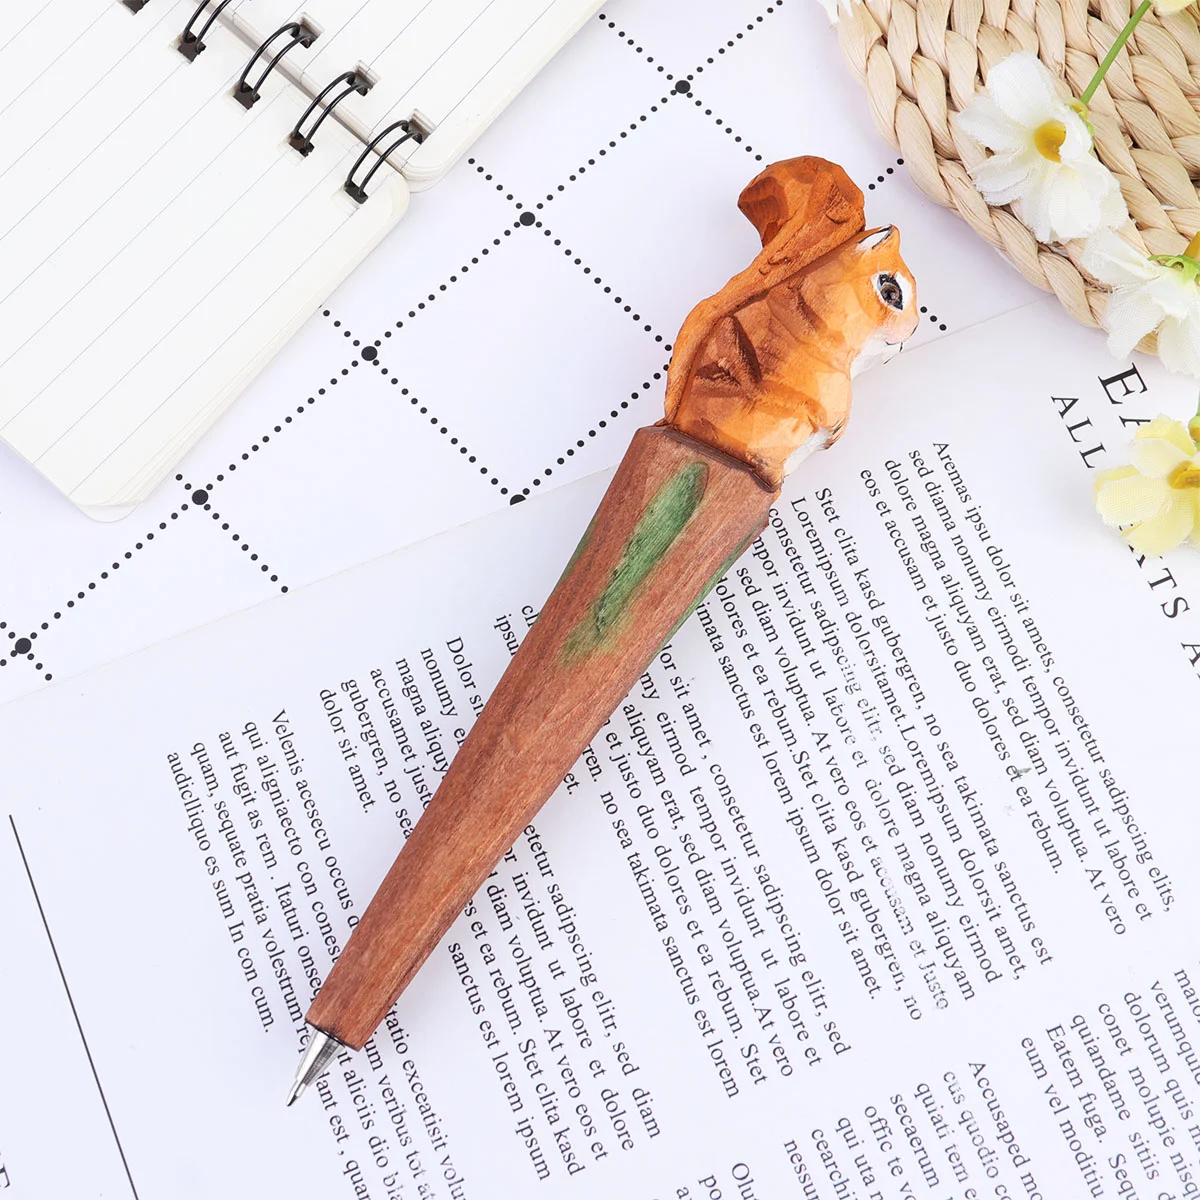 Pure Handmade Wood Carving Animal Pen Creative Wood Carving Squirrel Ballpoint Pen Replaceable Refill Gel Pen for Students 4 pcs set students 10colors crayons oil pastel creative diy replaceable colored pencil graffiti pen for kids painting drawing